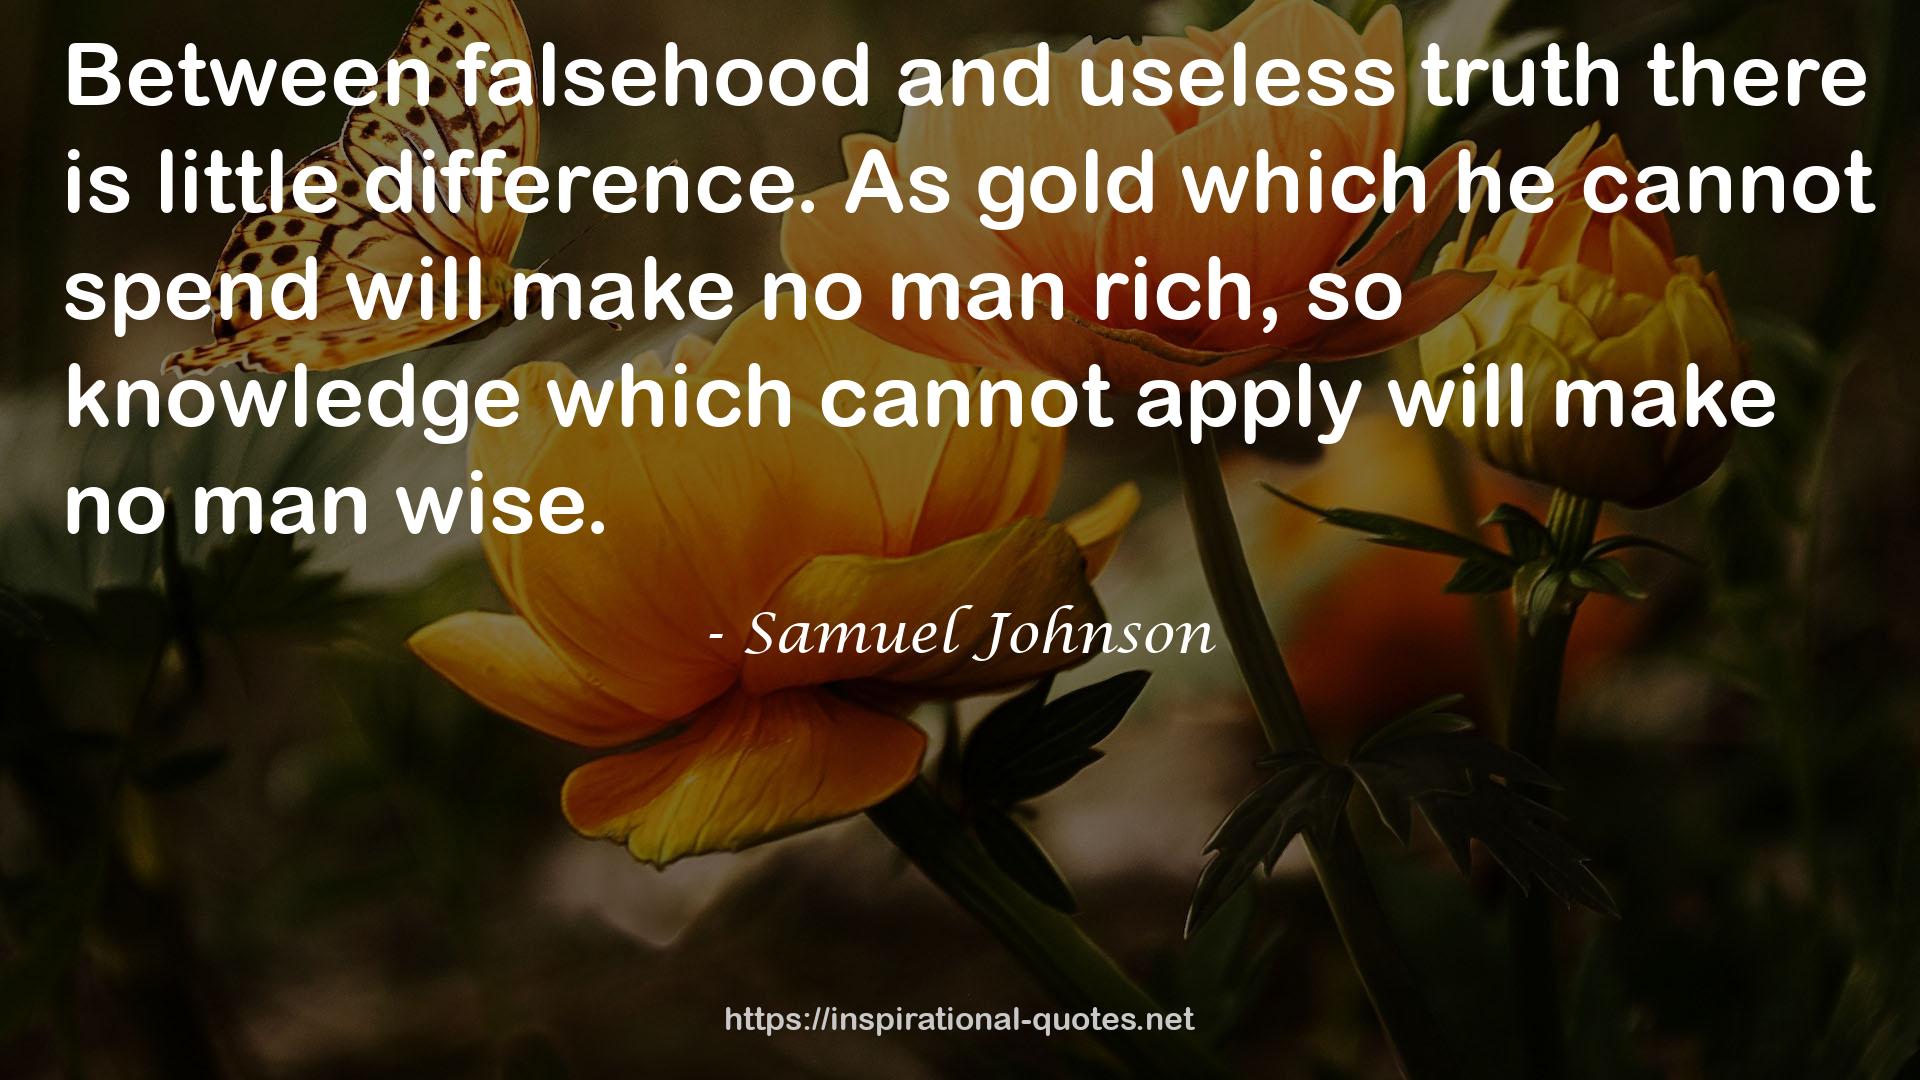 falsehood and useless truth  QUOTES